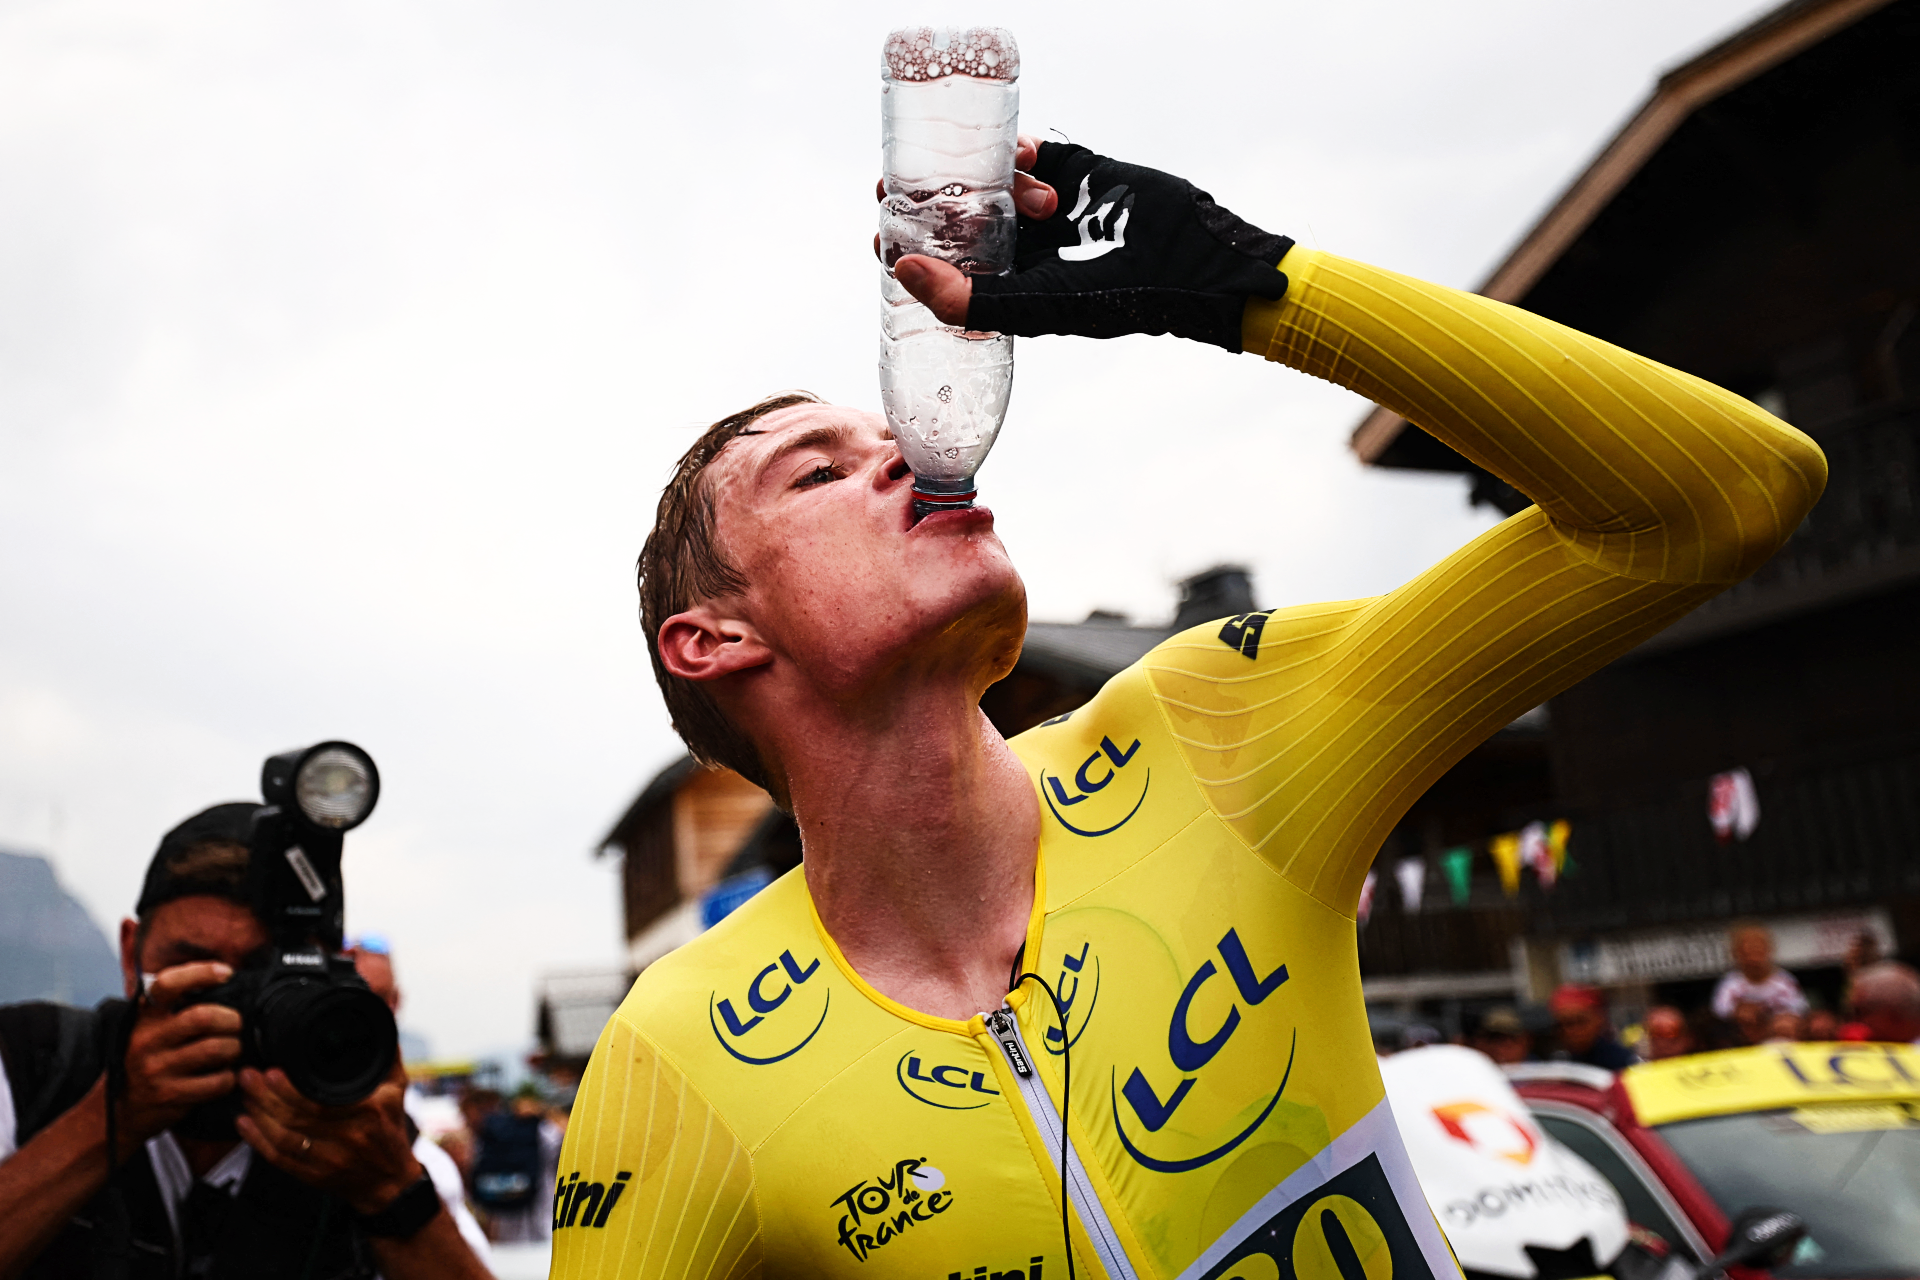 Jonas Vingegaard downs some water after winning Tuesday’s stage 16 time trial